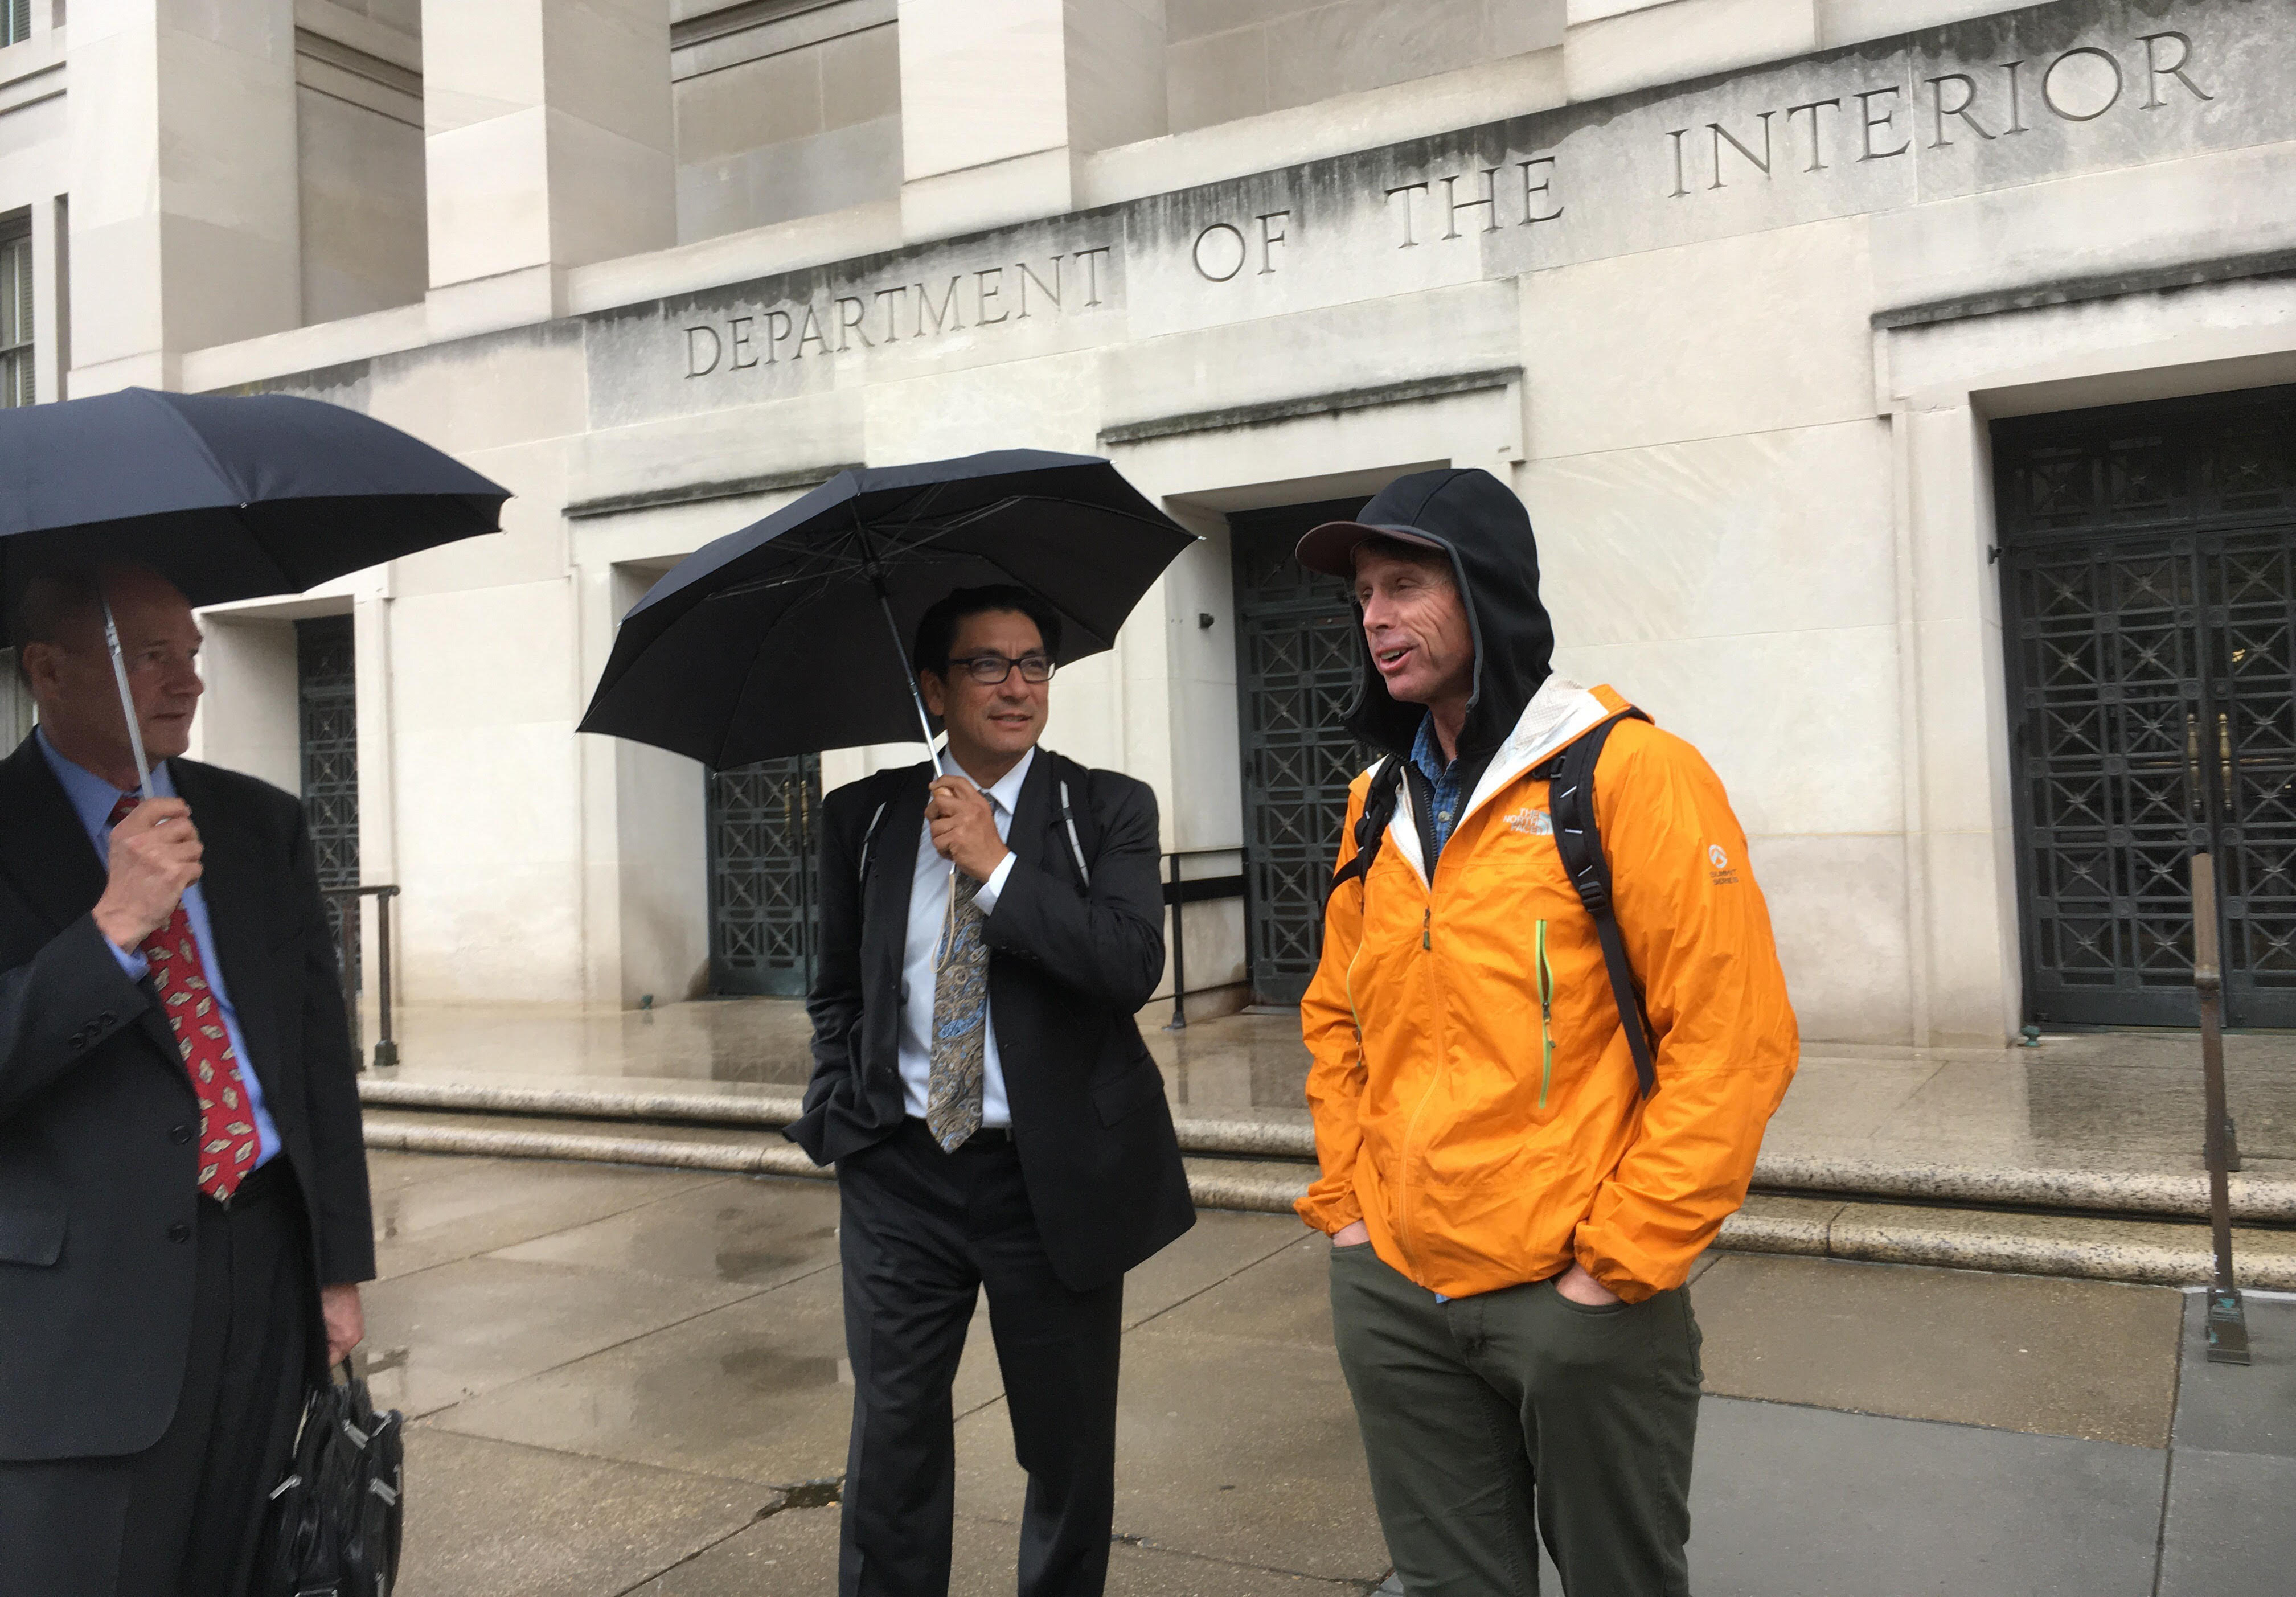 From left, Access Fund representatives Curt Shannon, Kenji Haroutunian and Peter Croft wait for a cab after meetings inside the Department of Interior. [Photo] Derek Franz